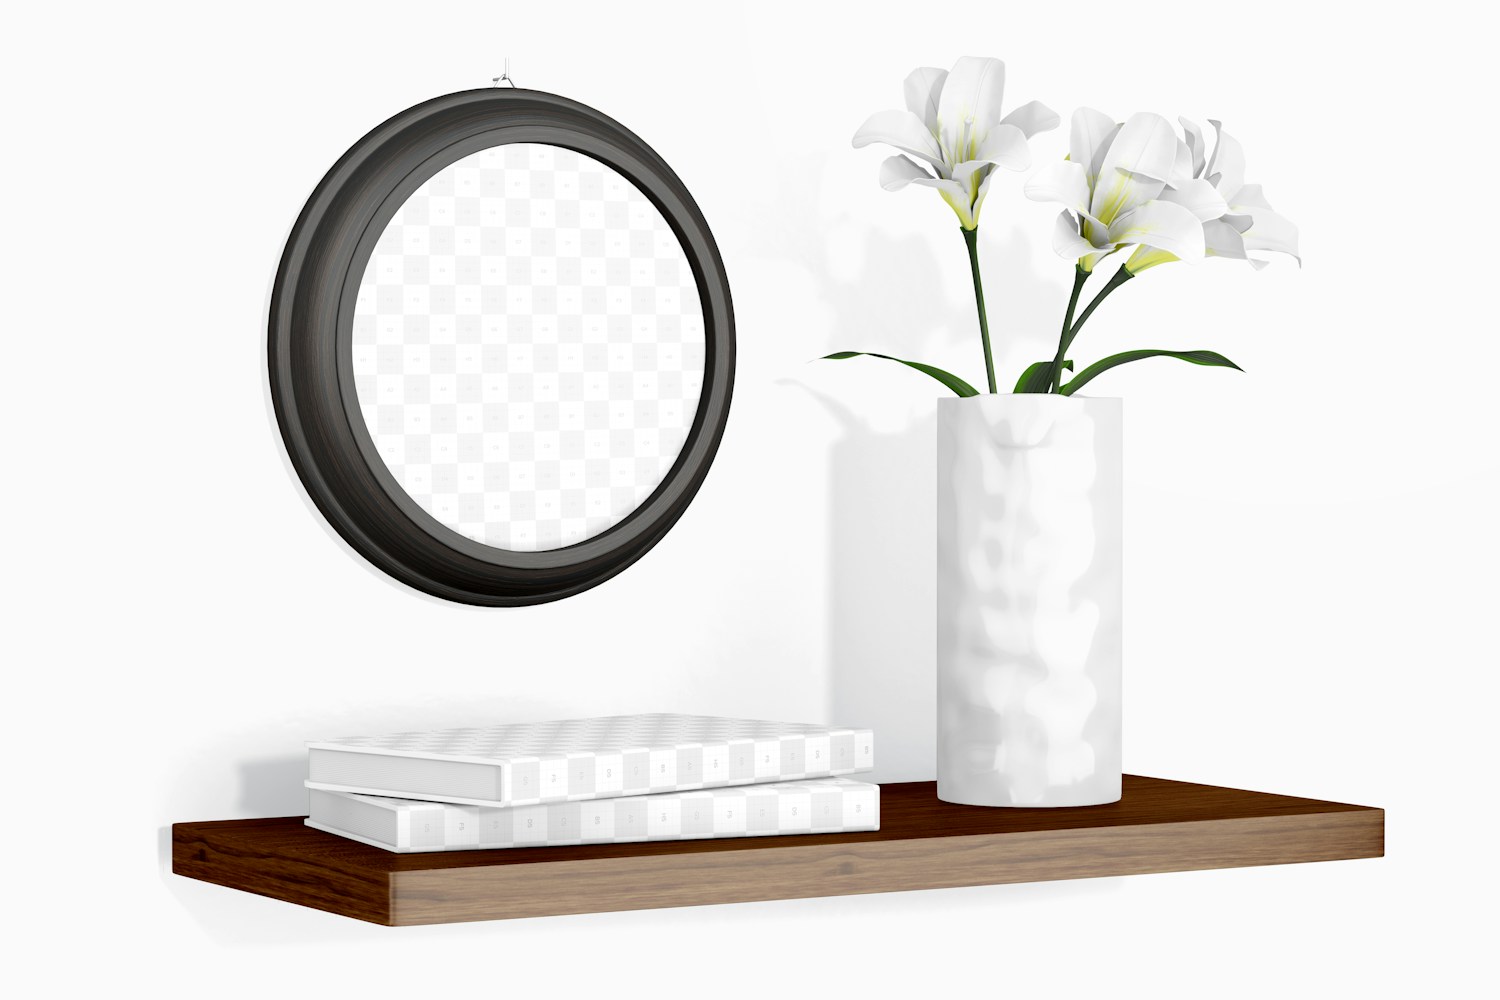 Round Photo Frame with Flower Vessel Mockup